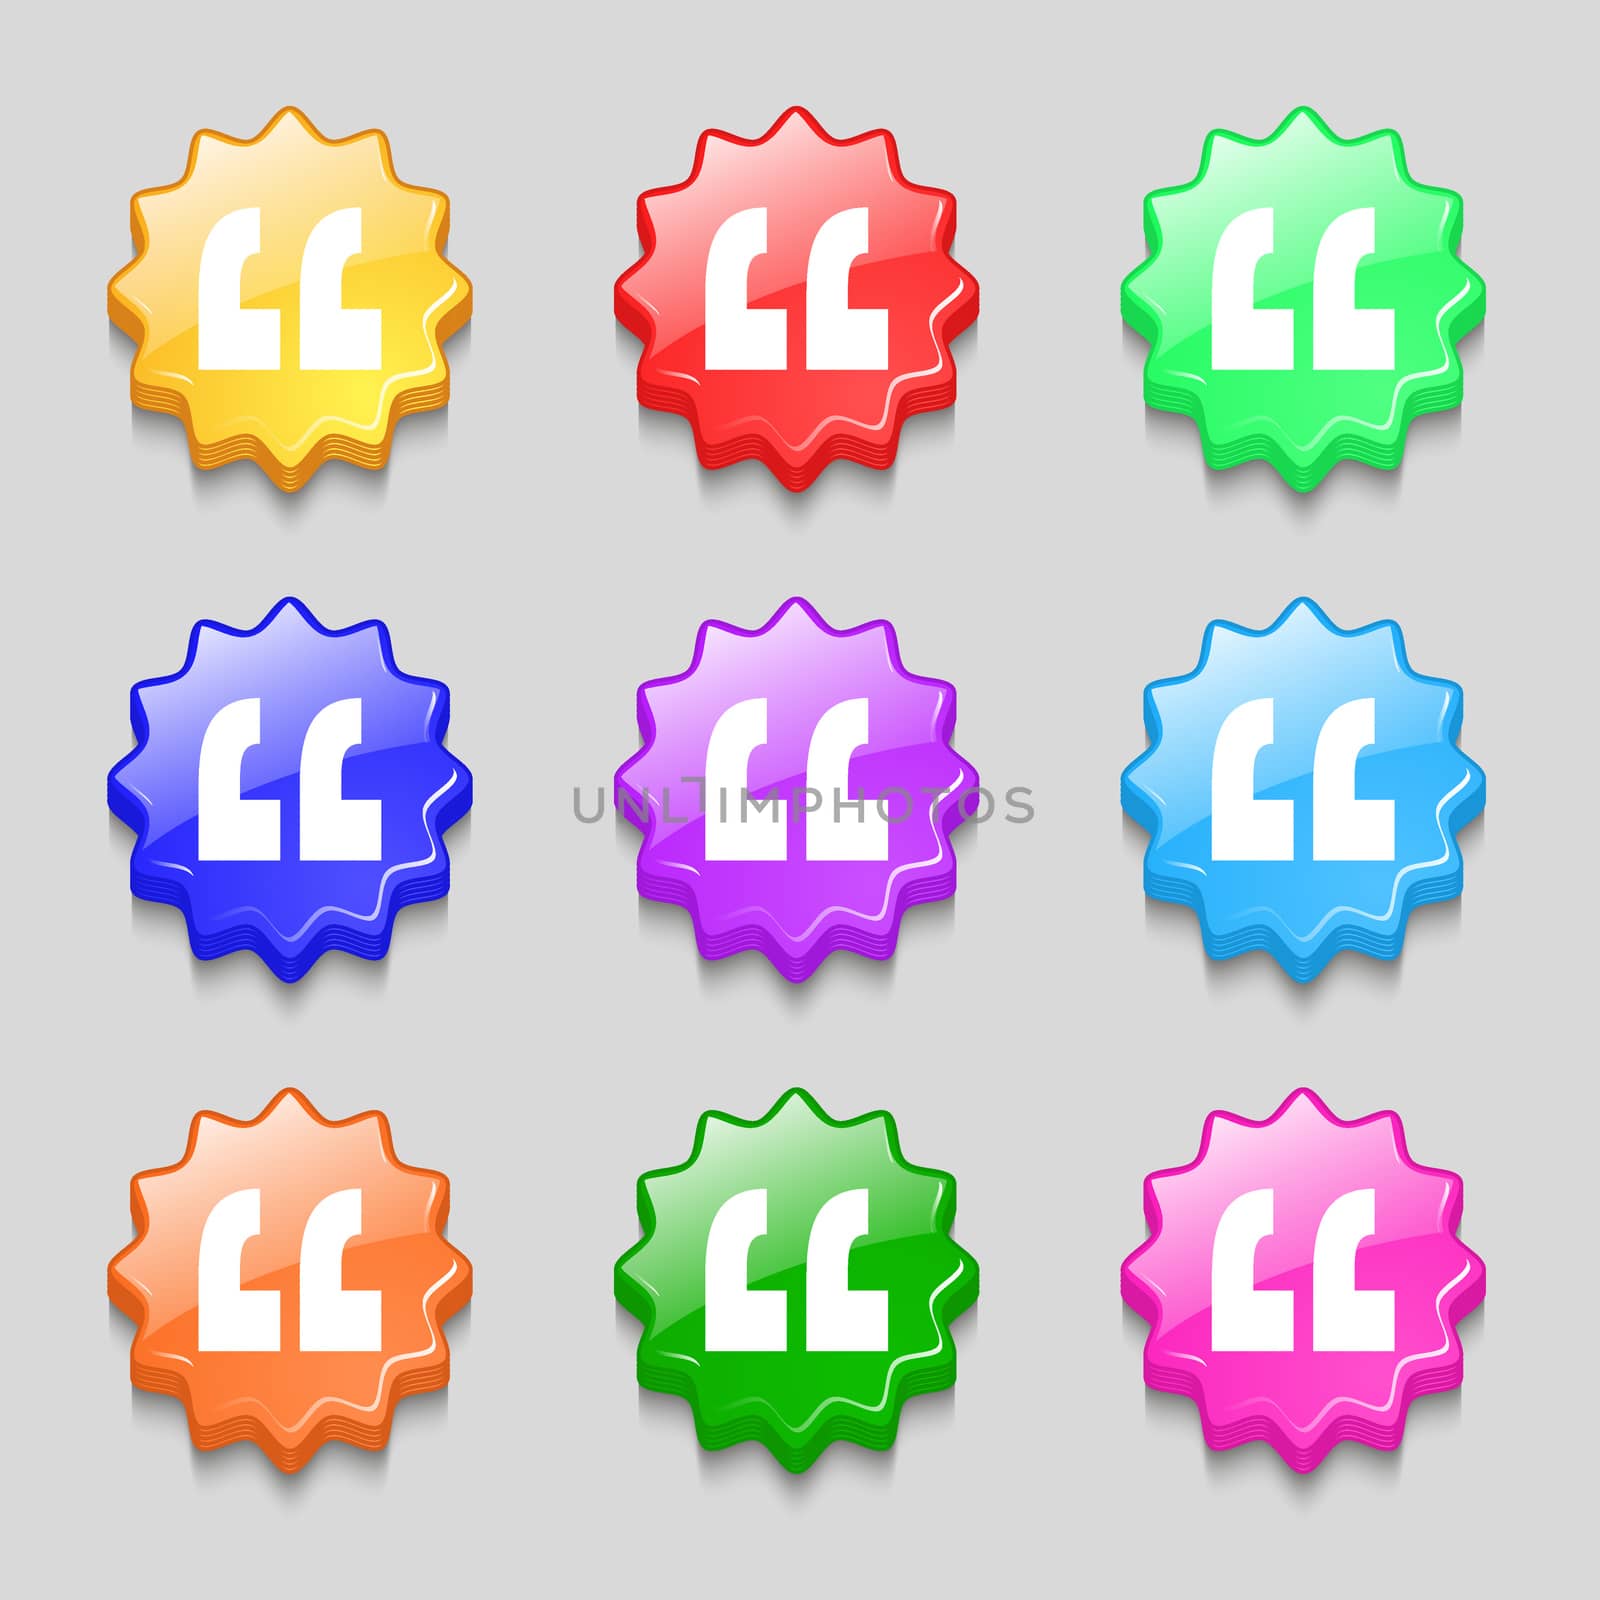 Quote sign icon. Quotation mark symbol. Double quotes at the end of words. Symbols on nine wavy colourful buttons. illustration